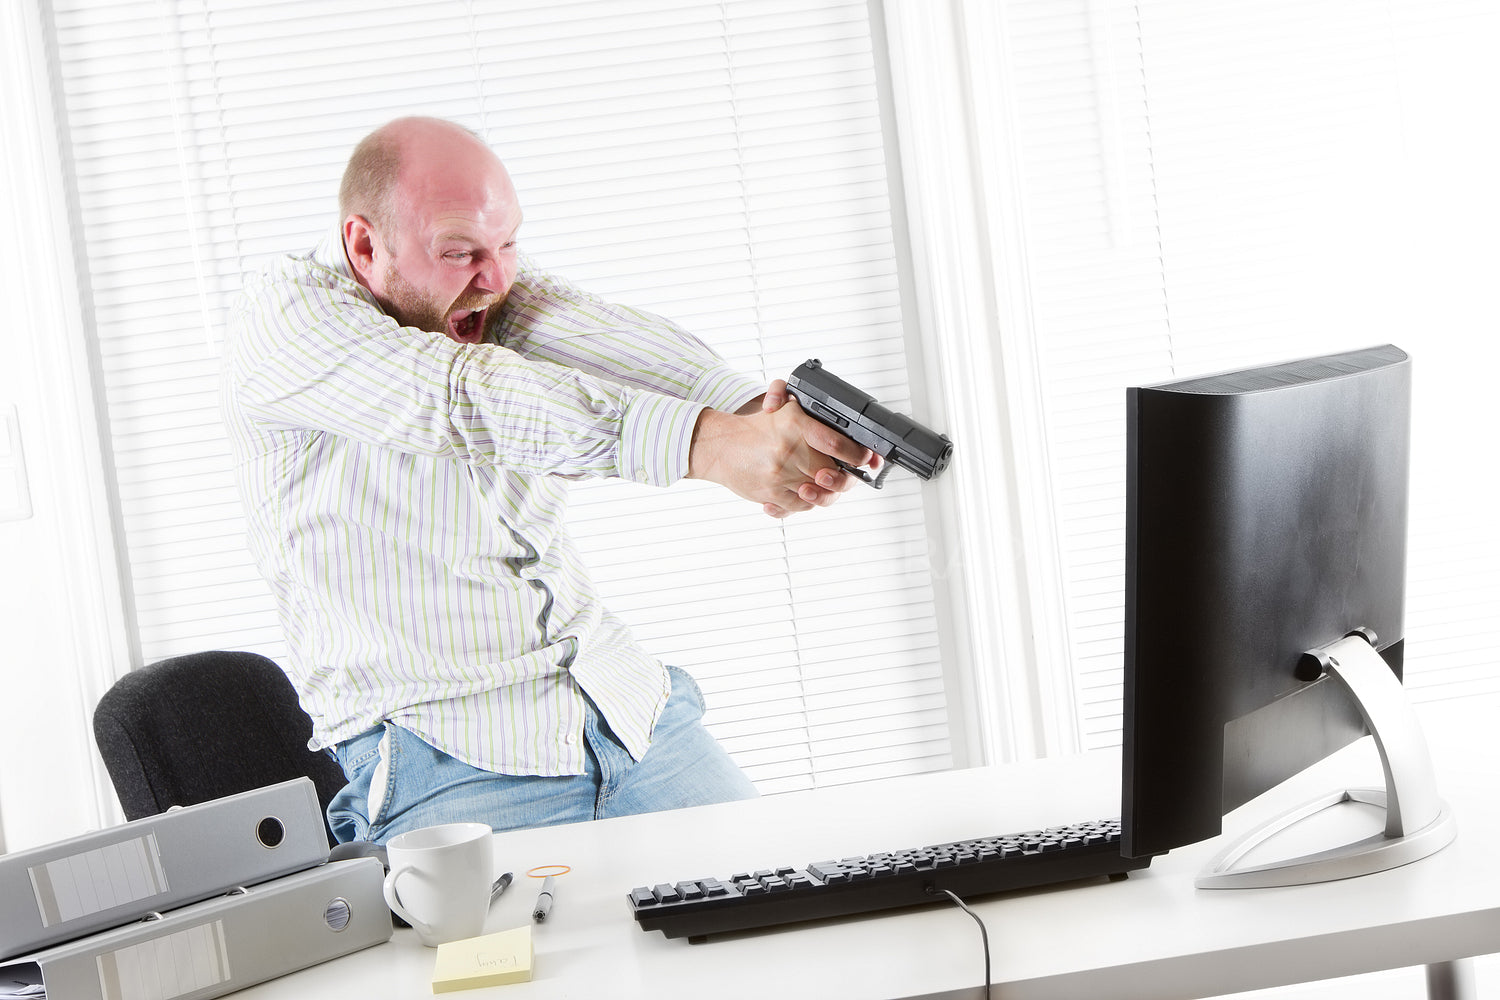 Angry Businessman Threatens Computer with a Gun